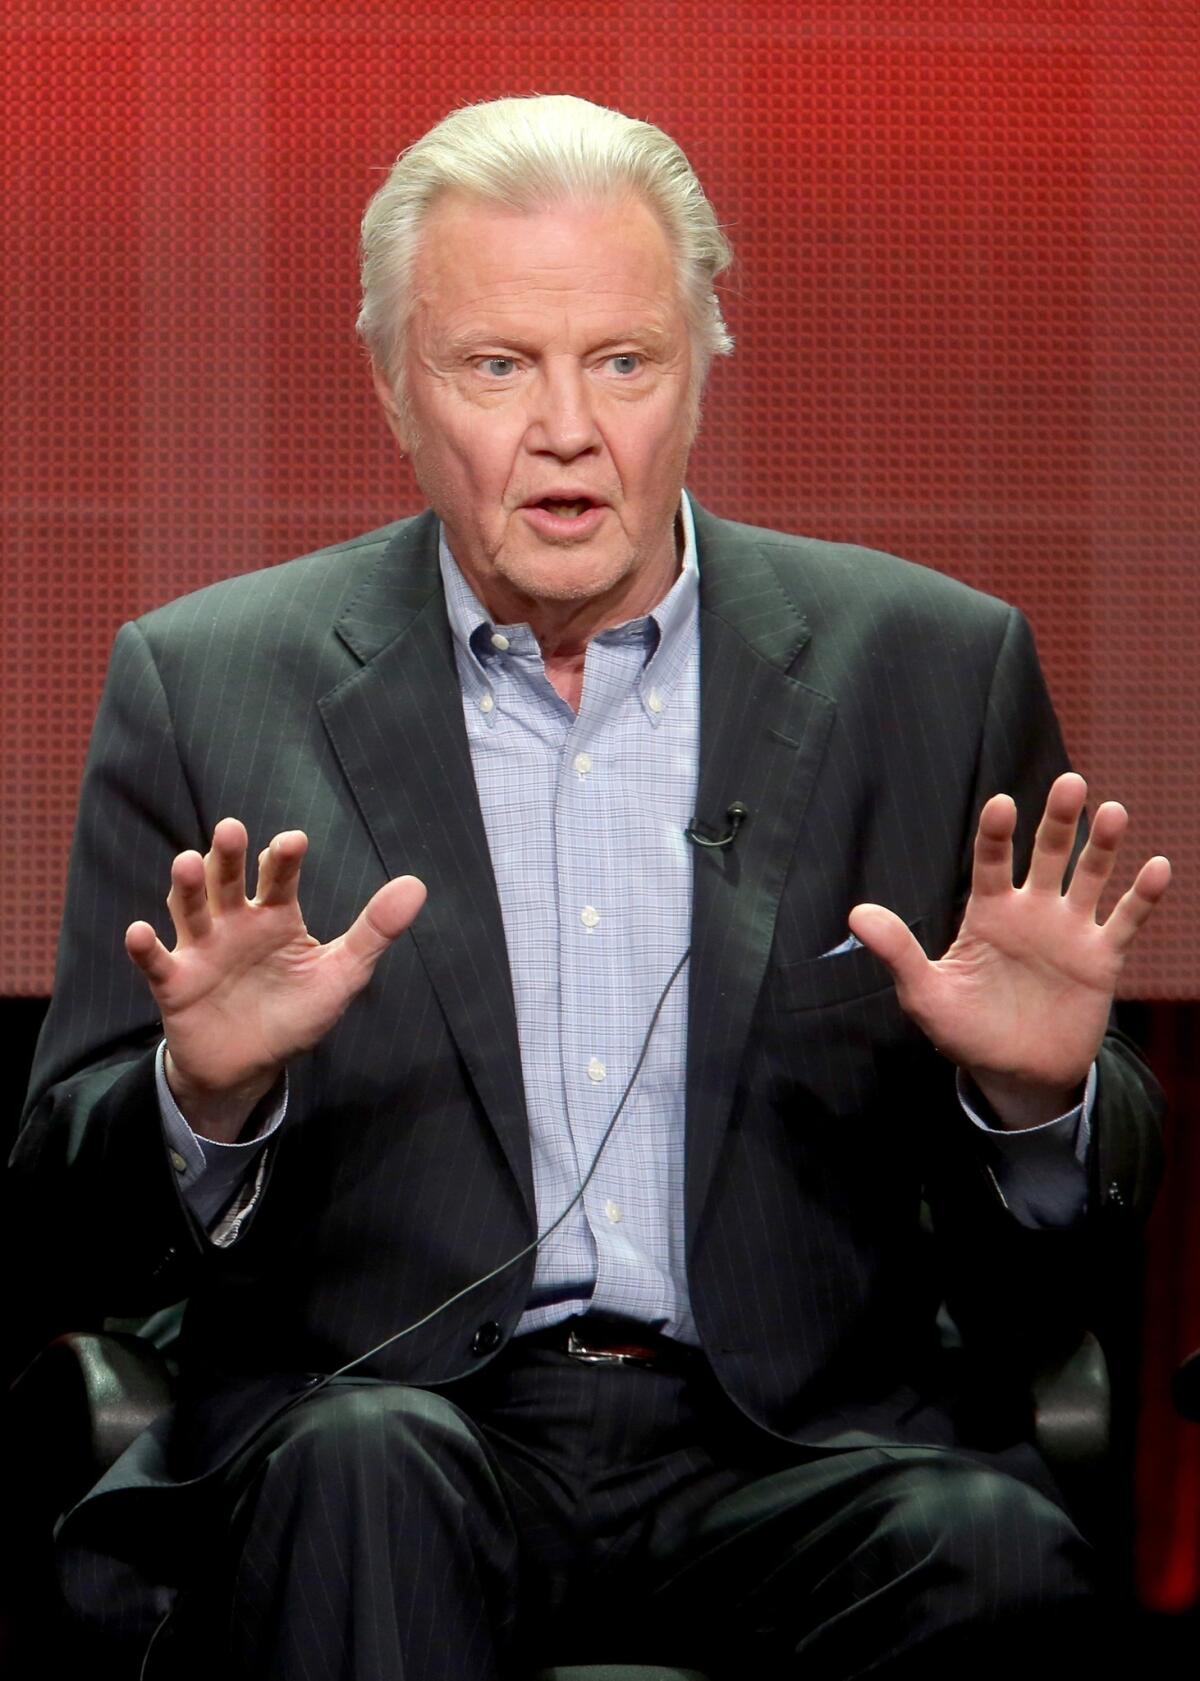 Jon Voight has written a letter published by the Hollywood Reporter on Monday in which he strongly criticizes Javier Bardem, Penelope Cruz and others who signed a missive against Israel's actions in Gaza.